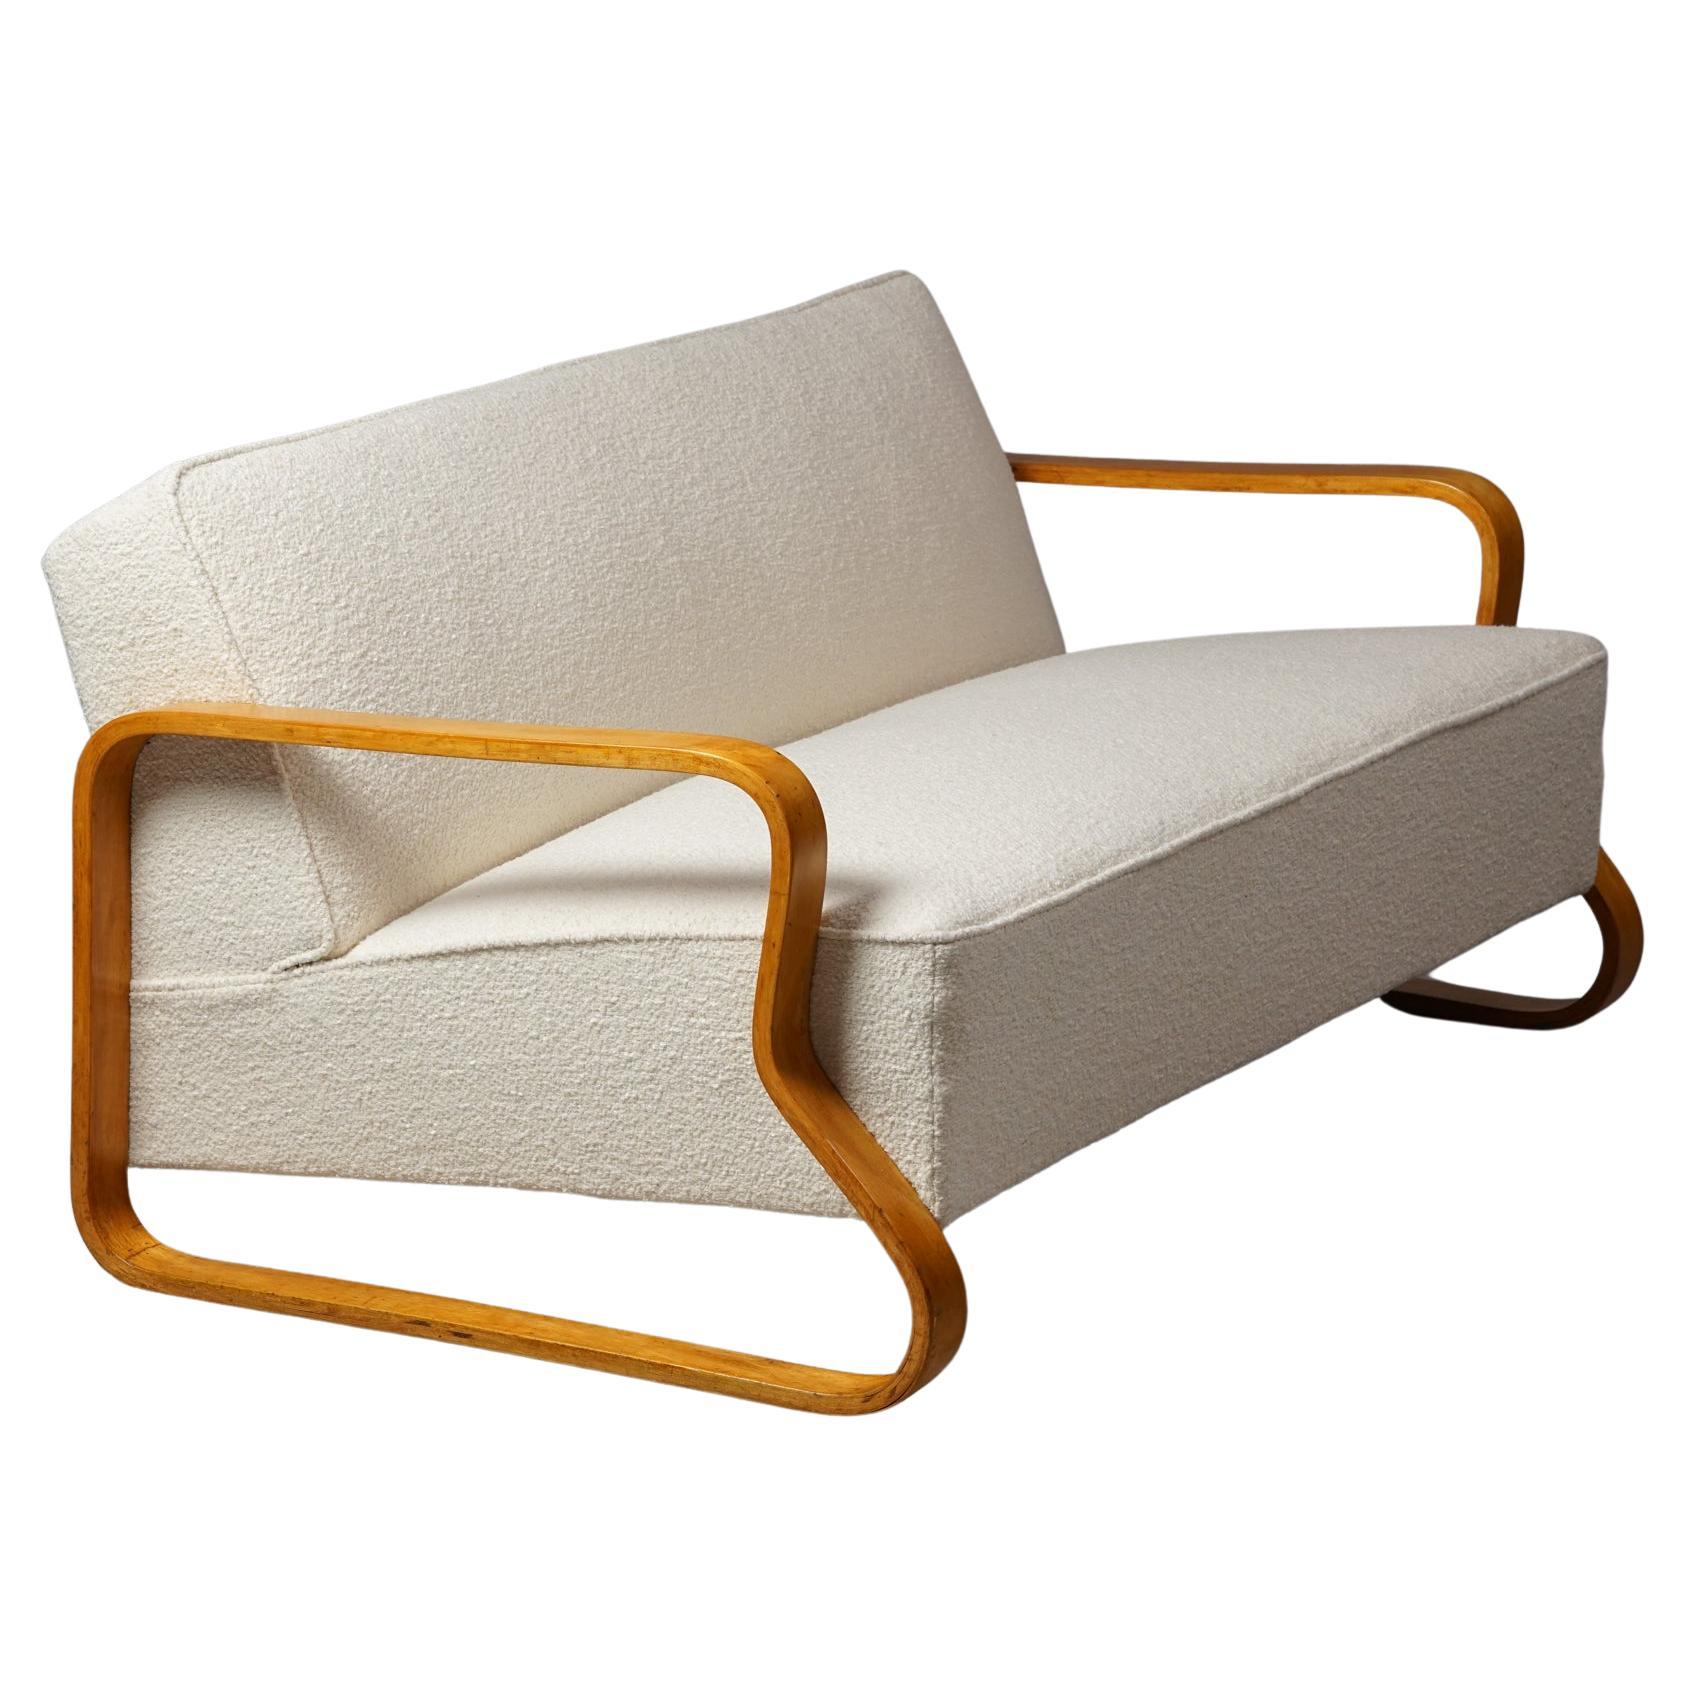 Exceptionally Rare Sofa Model '544', designed by Alvar Aalto for Artek,
Finland. 1932.

Bent birch and upholstered with Lauritzon's quality fabric. 

Early example. Marked.

Alvar Aalto tested the limits of plywood manufacturing in the early